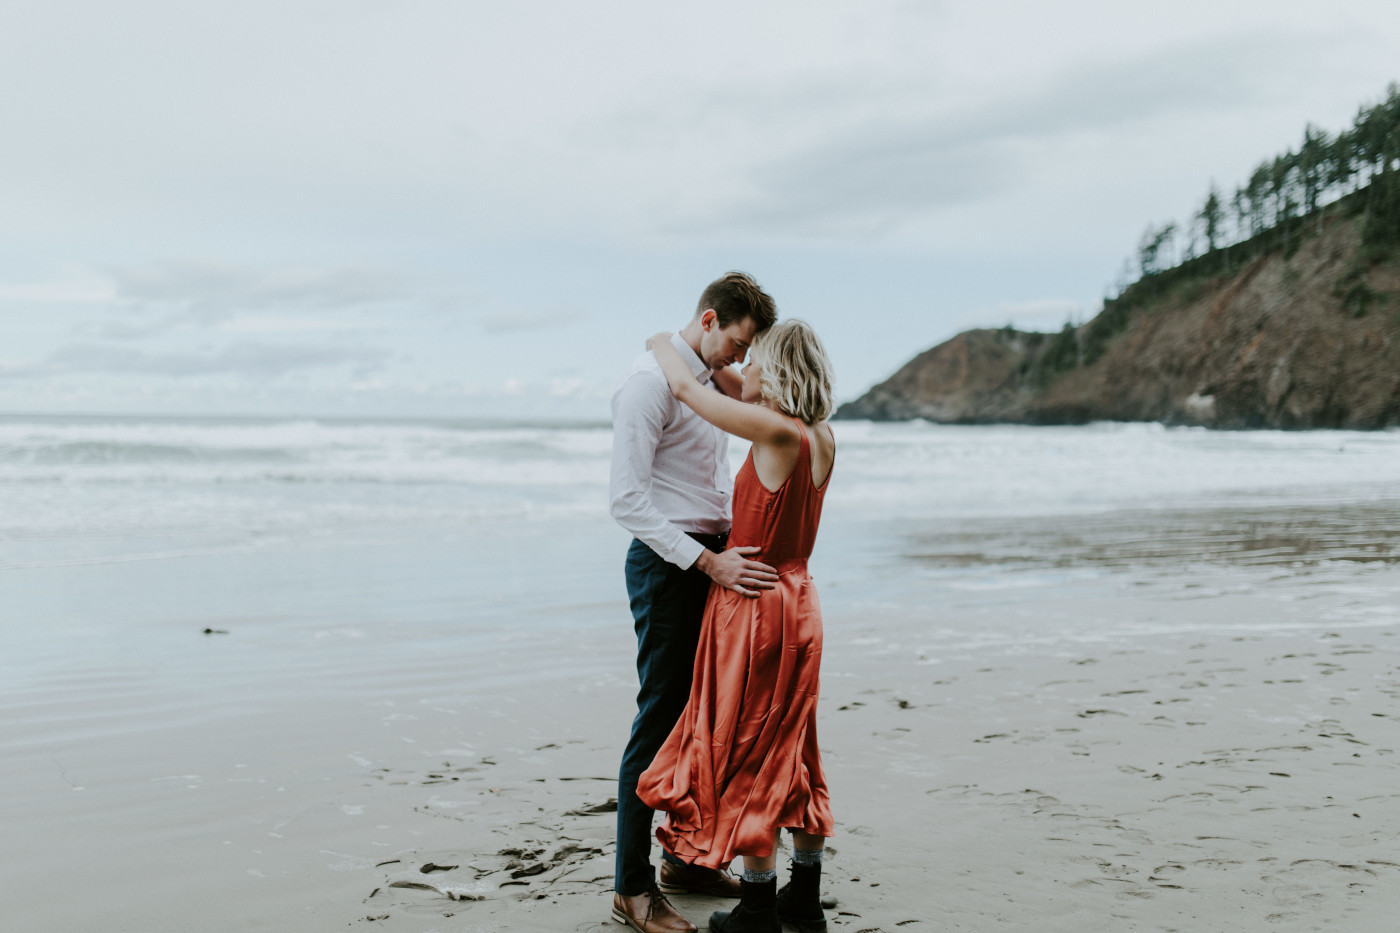 Billy and Chelsey stand with their foreheads together on the beach. Elopement wedding photography at Cannon Beach by Sienna Plus Josh.